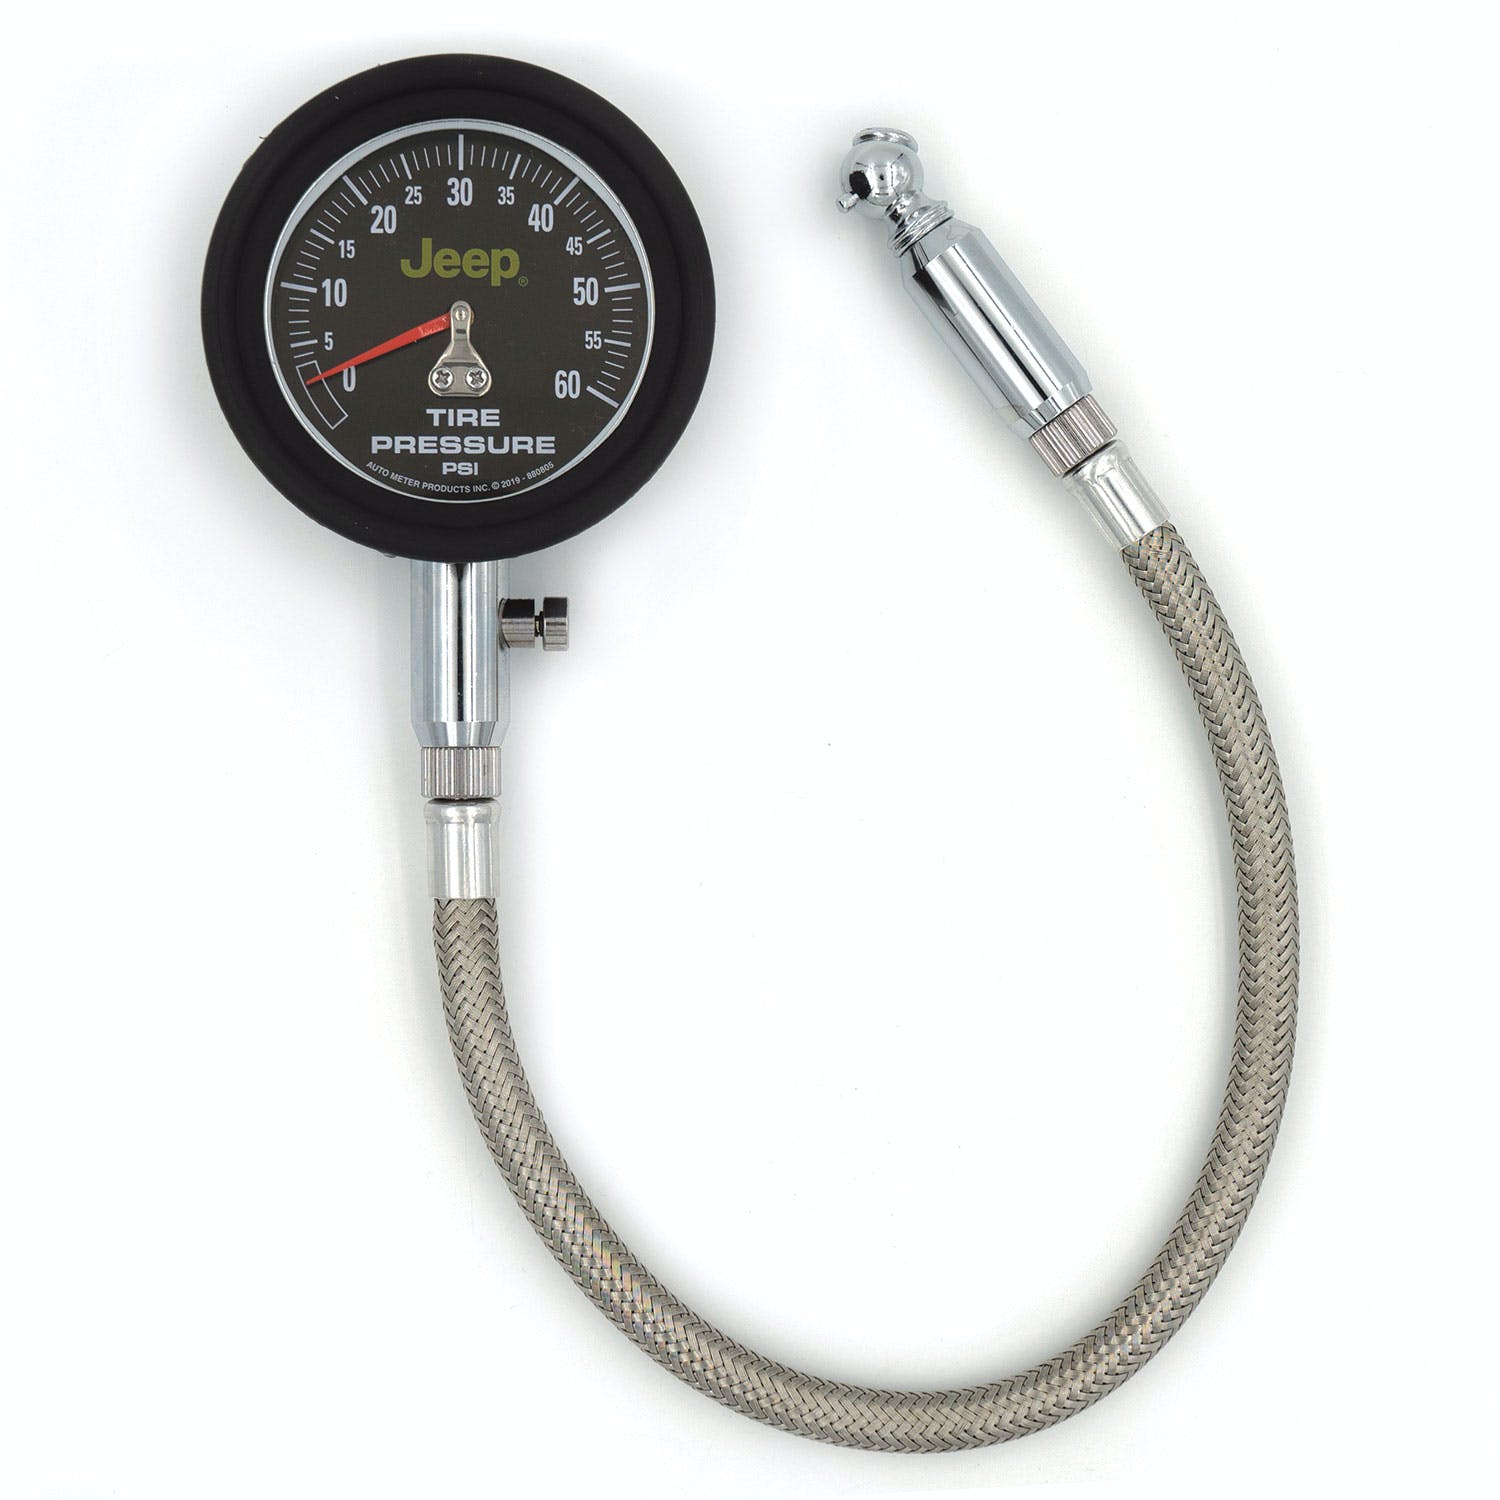 AutoMeter Products 880805 Tire Pressure Gauge, 0-60PSI, Jeep, Analog